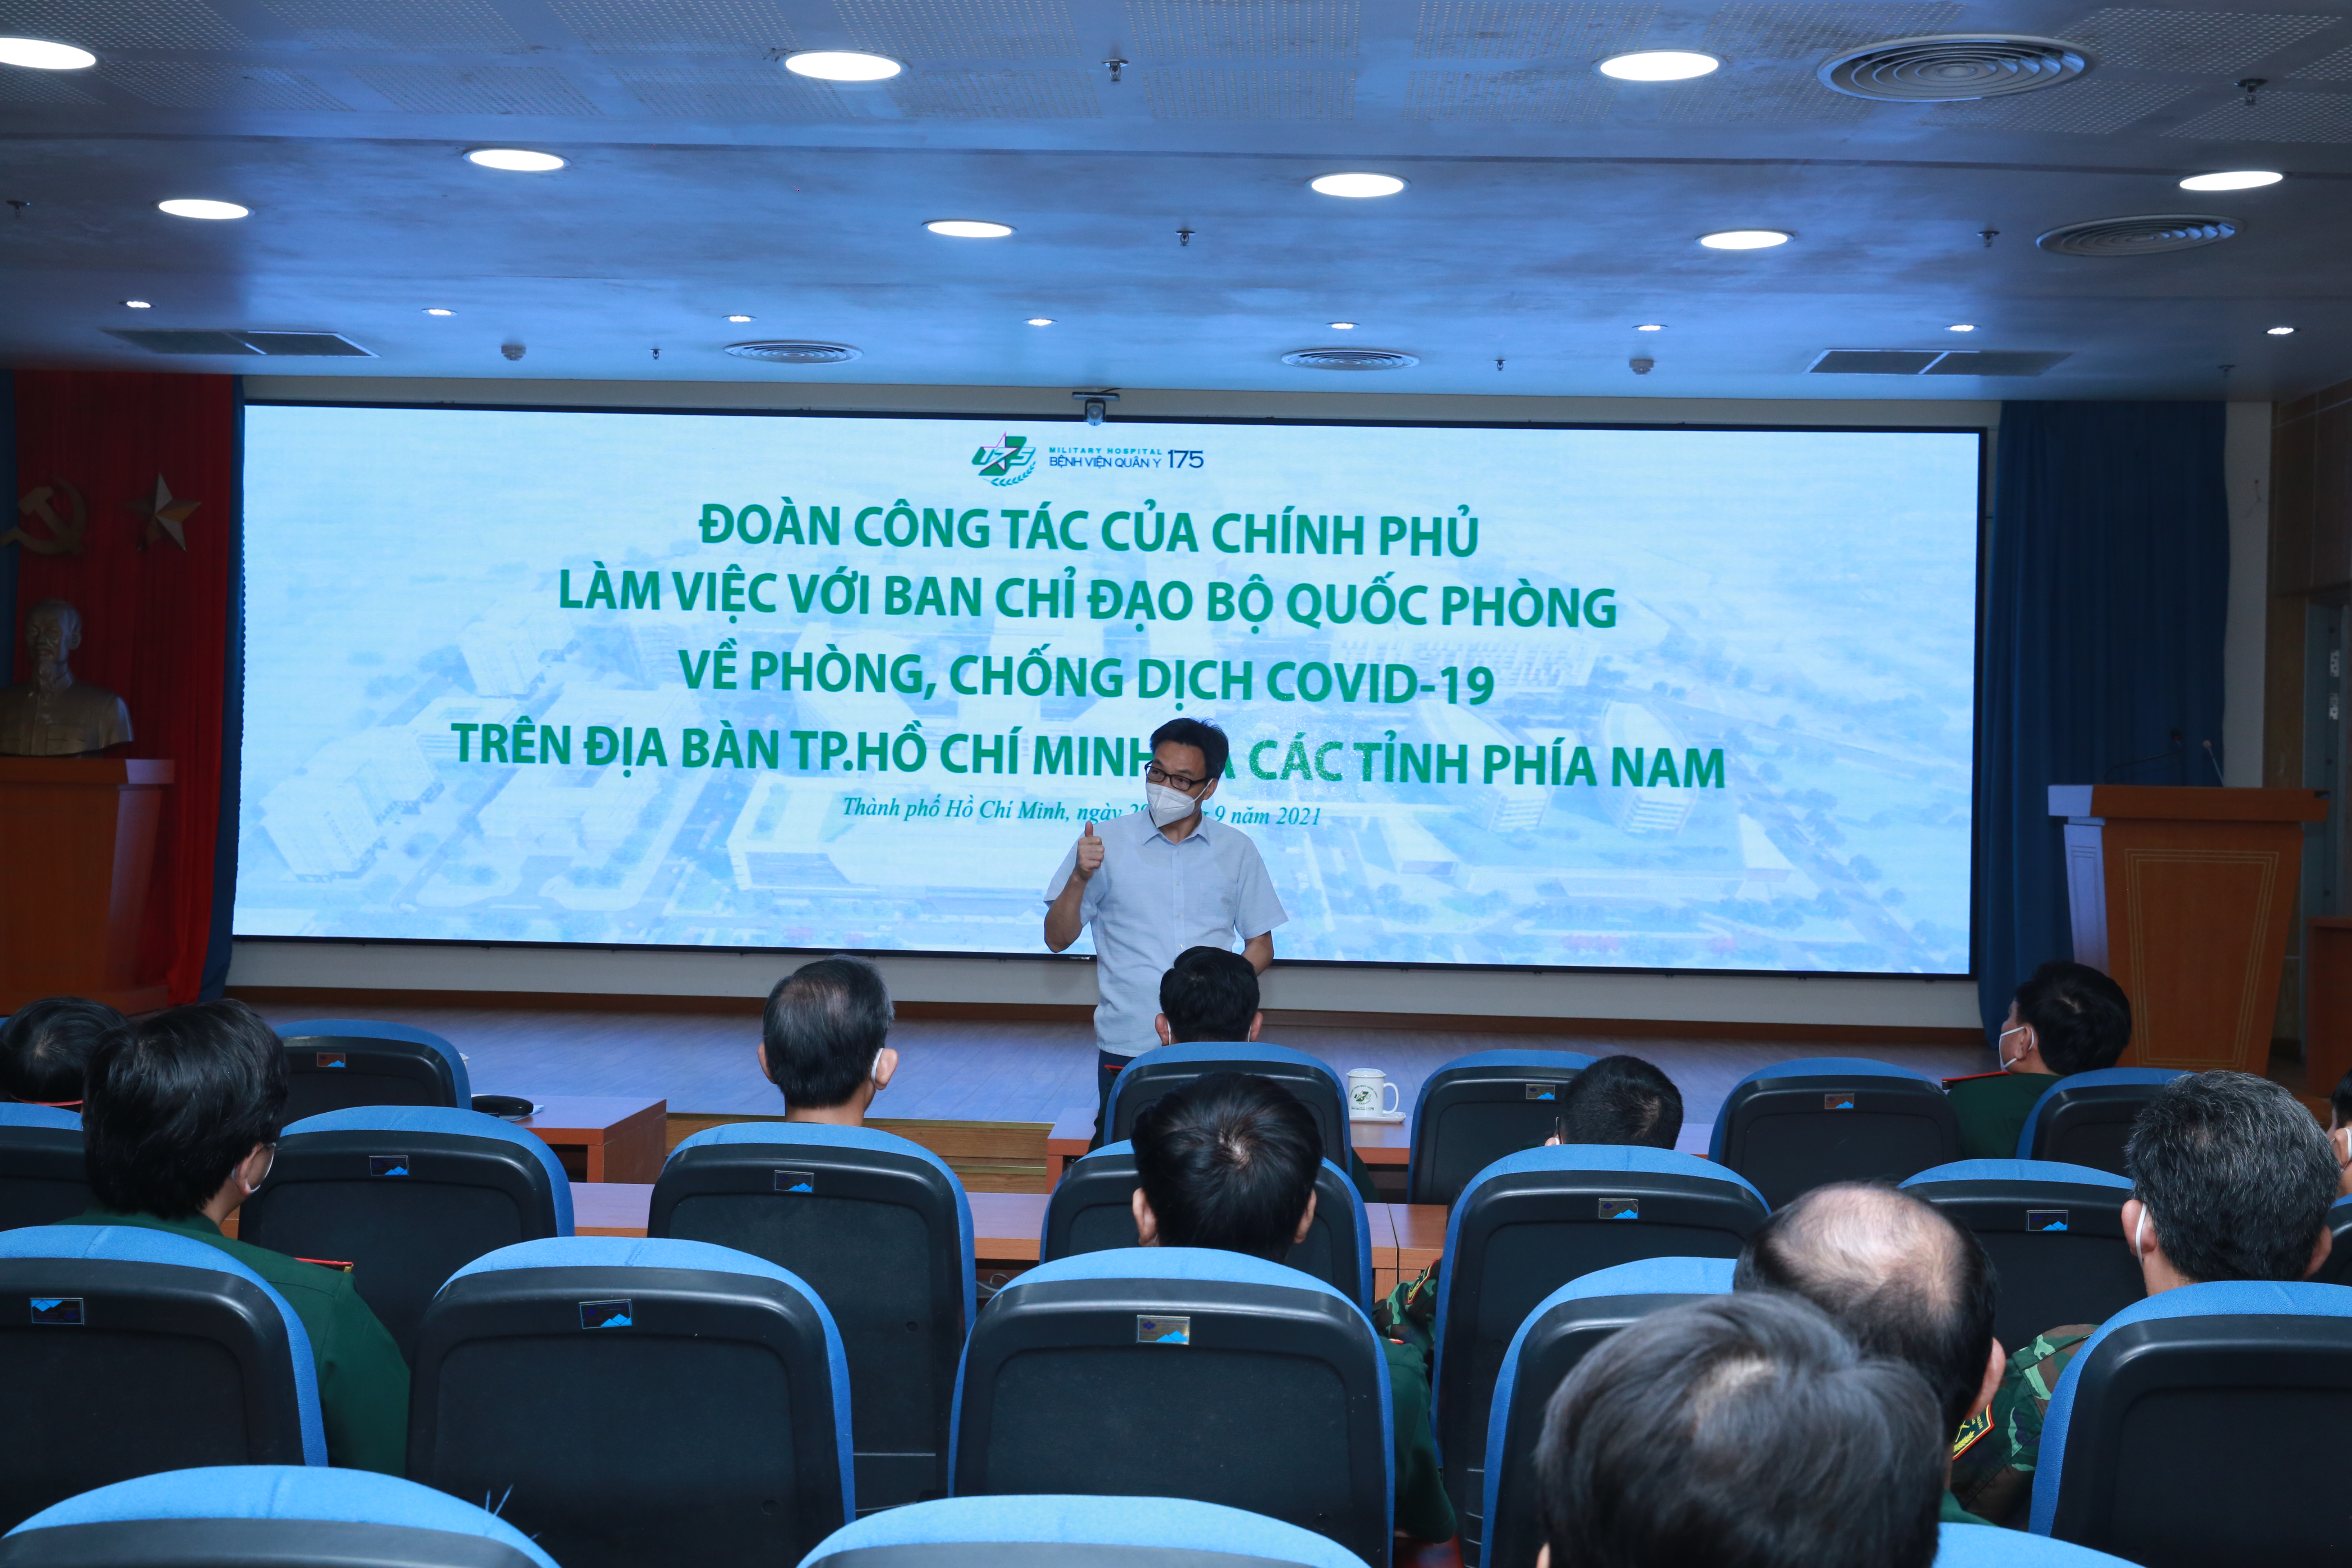 Military to continue assisting Ho Chi Minh City’s COVID-19 response beyond September 30